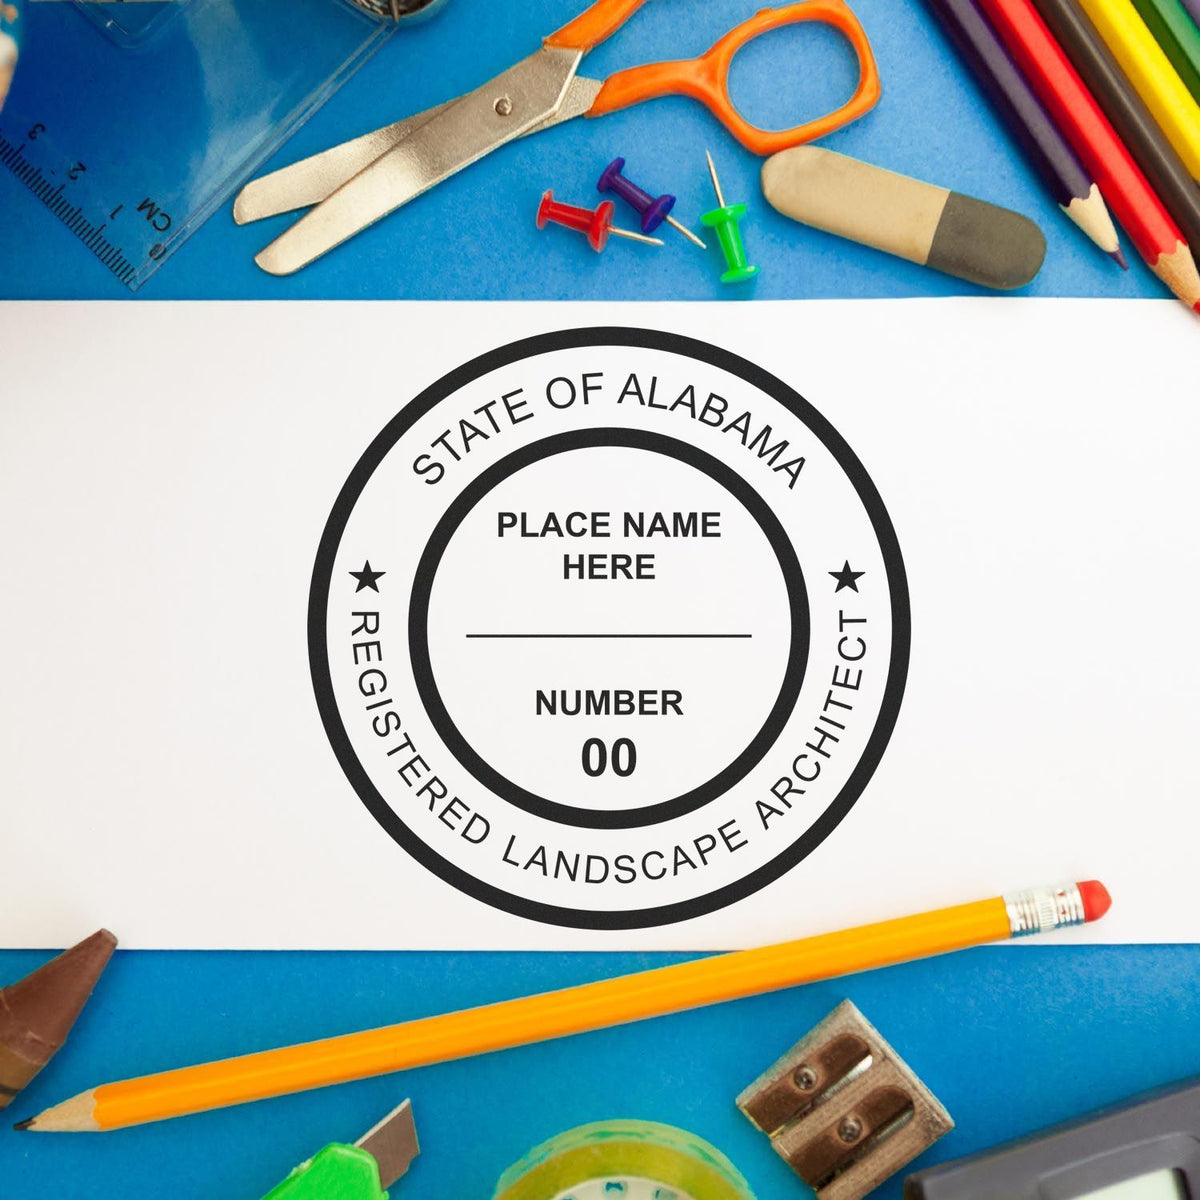 A photograph of the Self-Inking Alabama Landscape Architect Stamp stamp impression reveals a vivid, professional image of the on paper.